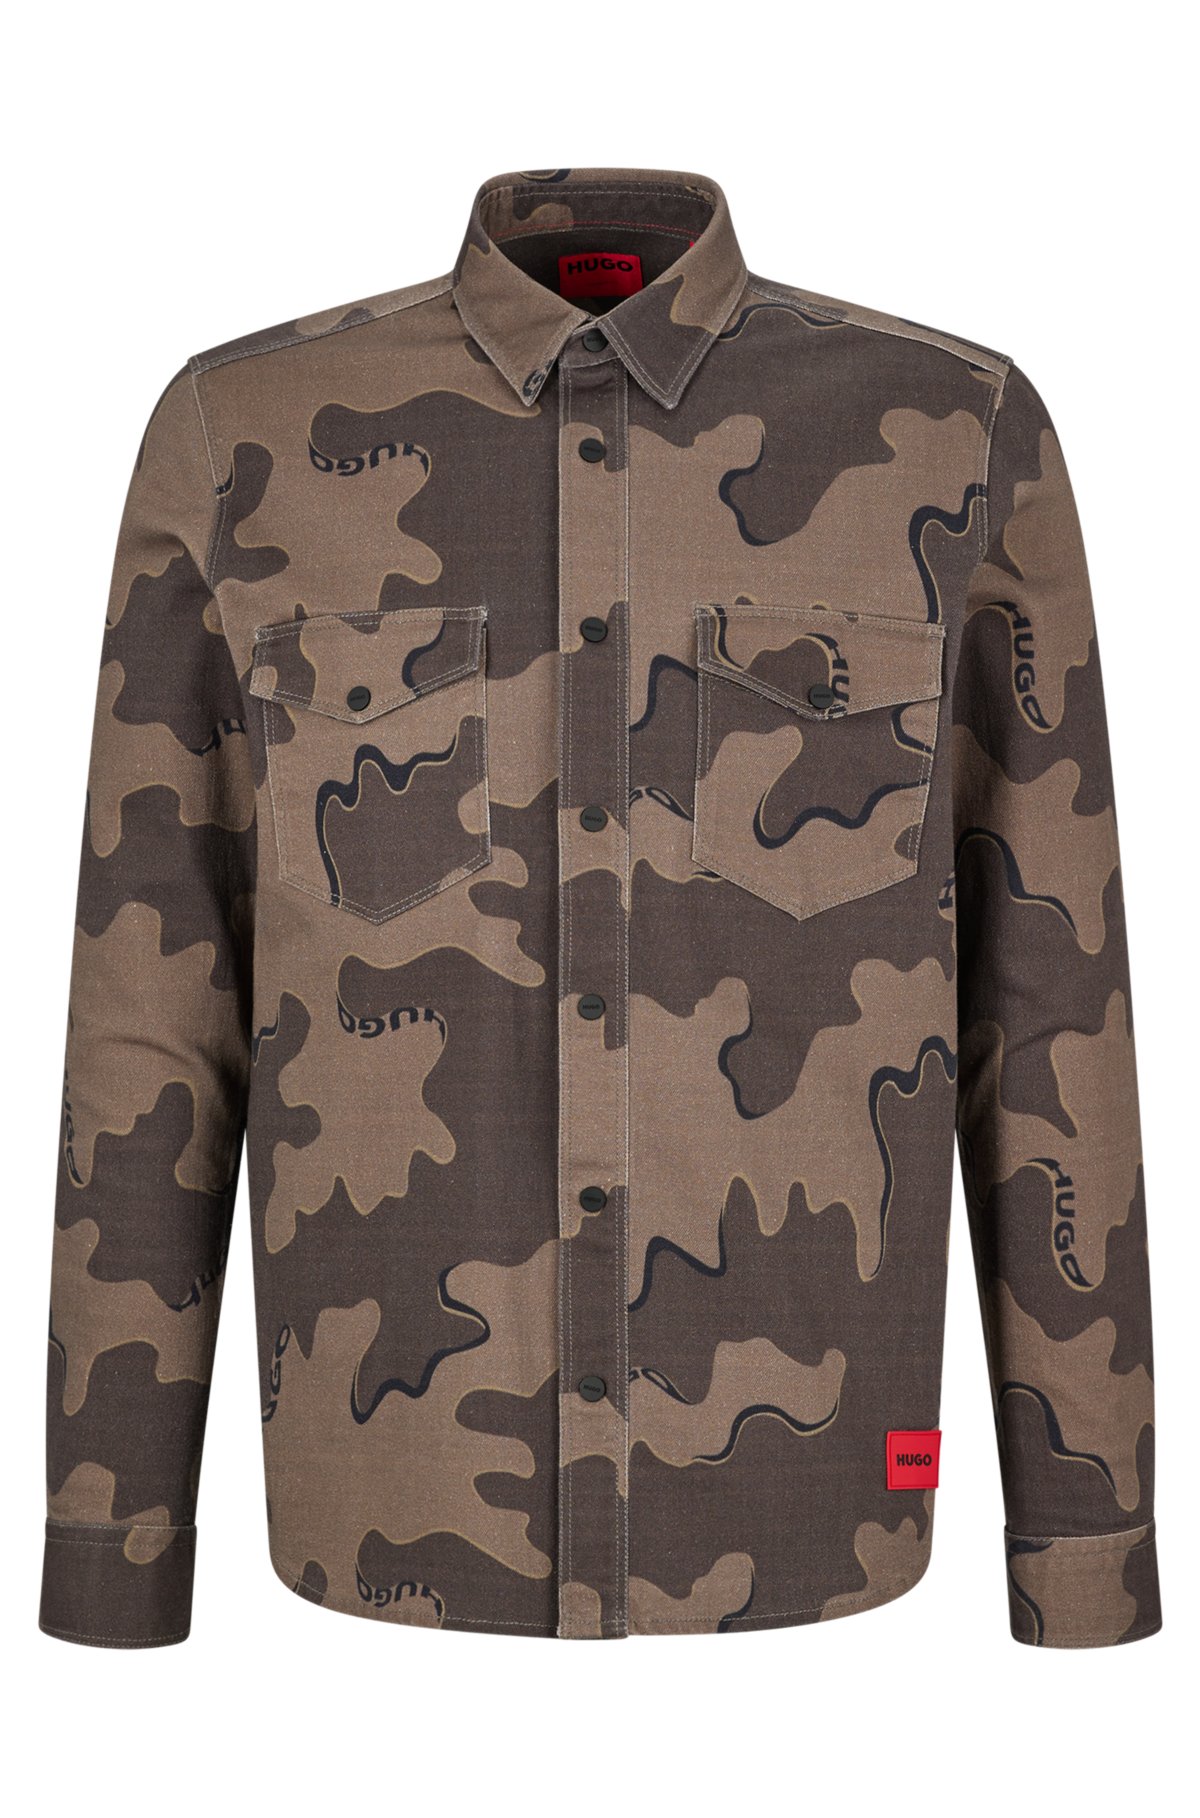 Hugo Men's Relaxed-Fit Overshirt in camouflage-print Stretch-cotton Twill - Patterned Green - Size Medium